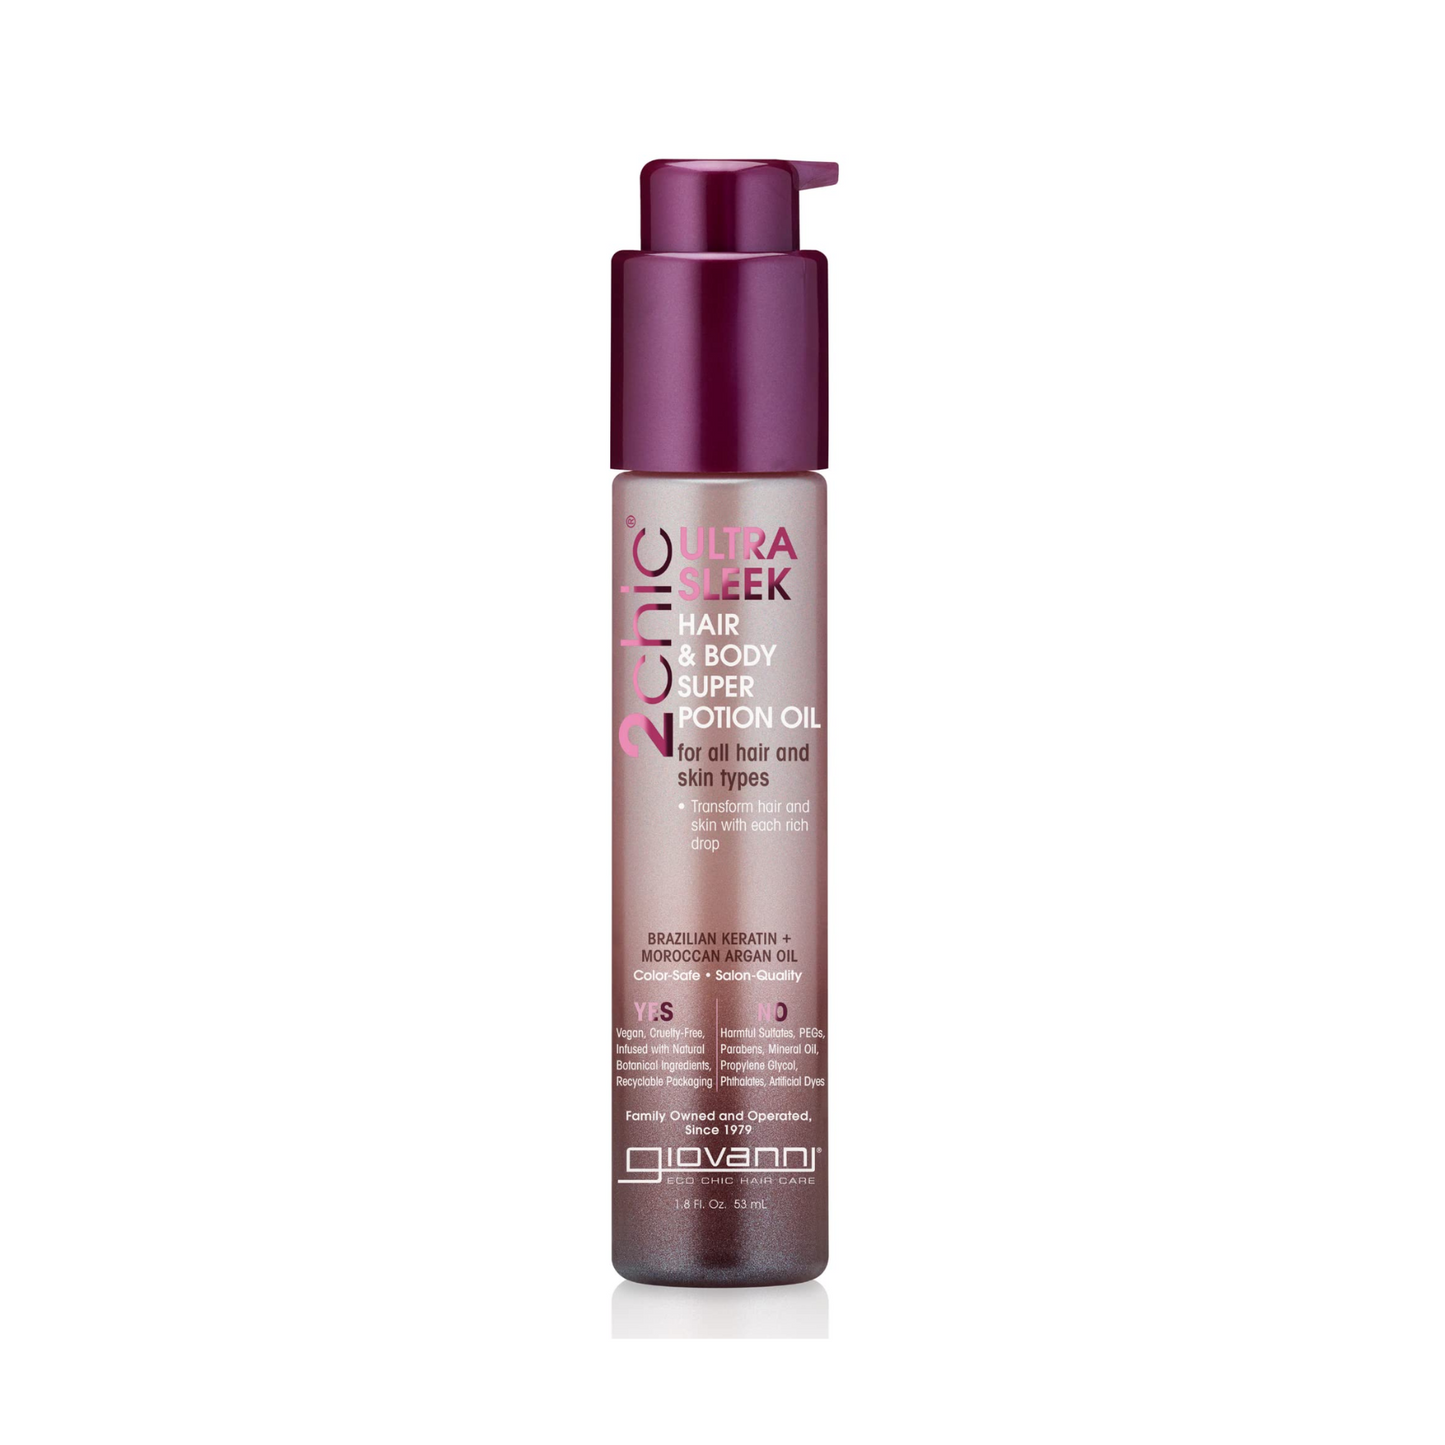 Giovanni 2Chic Ultra Sleek Hair & Body Super Potion 53mL, For All Hair Types